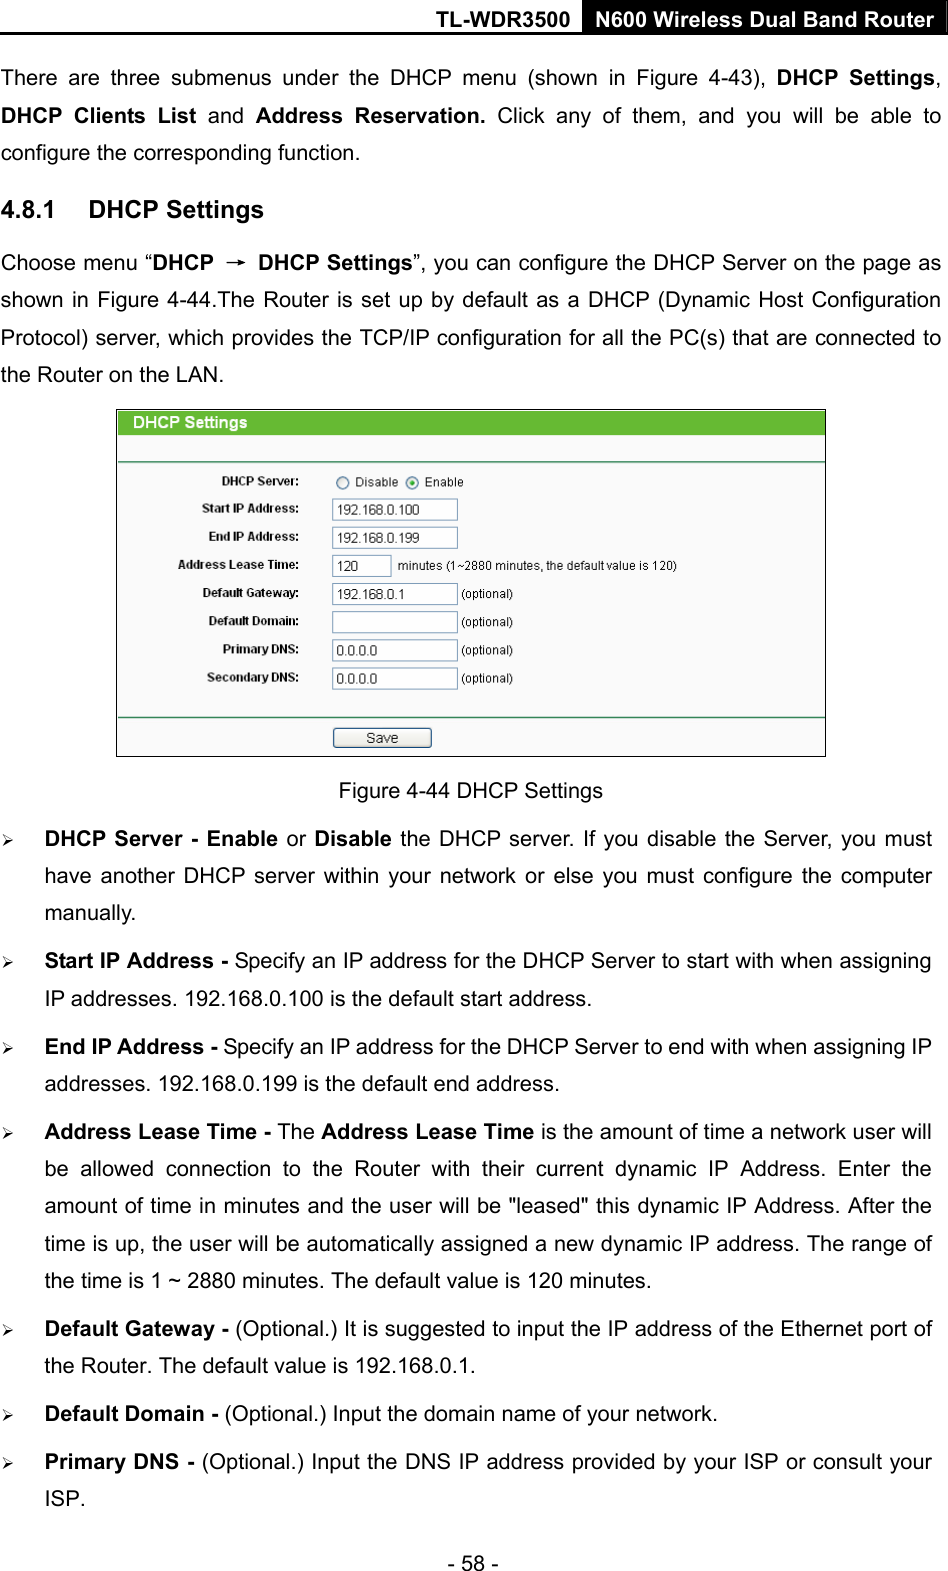 TL-WDR3500 N600 Wireless Dual Band Router - 58 - There are three submenus under the DHCP menu (shown in Figure 4-43),  DHCP Settings, DHCP Clients List and  Address Reservation. Click any of them, and you will be able to configure the corresponding function. 4.8.1  DHCP Settings Choose menu “DHCP  → DHCP Settings”, you can configure the DHCP Server on the page as shown in Figure 4-44.The Router is set up by default as a DHCP (Dynamic Host Configuration Protocol) server, which provides the TCP/IP configuration for all the PC(s) that are connected to the Router on the LAN.    Figure 4-44 DHCP Settings  DHCP Server - Enable or Disable the DHCP server. If you disable the Server, you must have another DHCP server within your network or else you must configure the computer manually.  Start IP Address - Specify an IP address for the DHCP Server to start with when assigning IP addresses. 192.168.0.100 is the default start address.  End IP Address - Specify an IP address for the DHCP Server to end with when assigning IP addresses. 192.168.0.199 is the default end address.  Address Lease Time - The Address Lease Time is the amount of time a network user will be allowed connection to the Router with their current dynamic IP Address. Enter the amount of time in minutes and the user will be &quot;leased&quot; this dynamic IP Address. After the time is up, the user will be automatically assigned a new dynamic IP address. The range of the time is 1 ~ 2880 minutes. The default value is 120 minutes.  Default Gateway - (Optional.) It is suggested to input the IP address of the Ethernet port of the Router. The default value is 192.168.0.1.  Default Domain - (Optional.) Input the domain name of your network.  Primary DNS - (Optional.) Input the DNS IP address provided by your ISP or consult your ISP. 